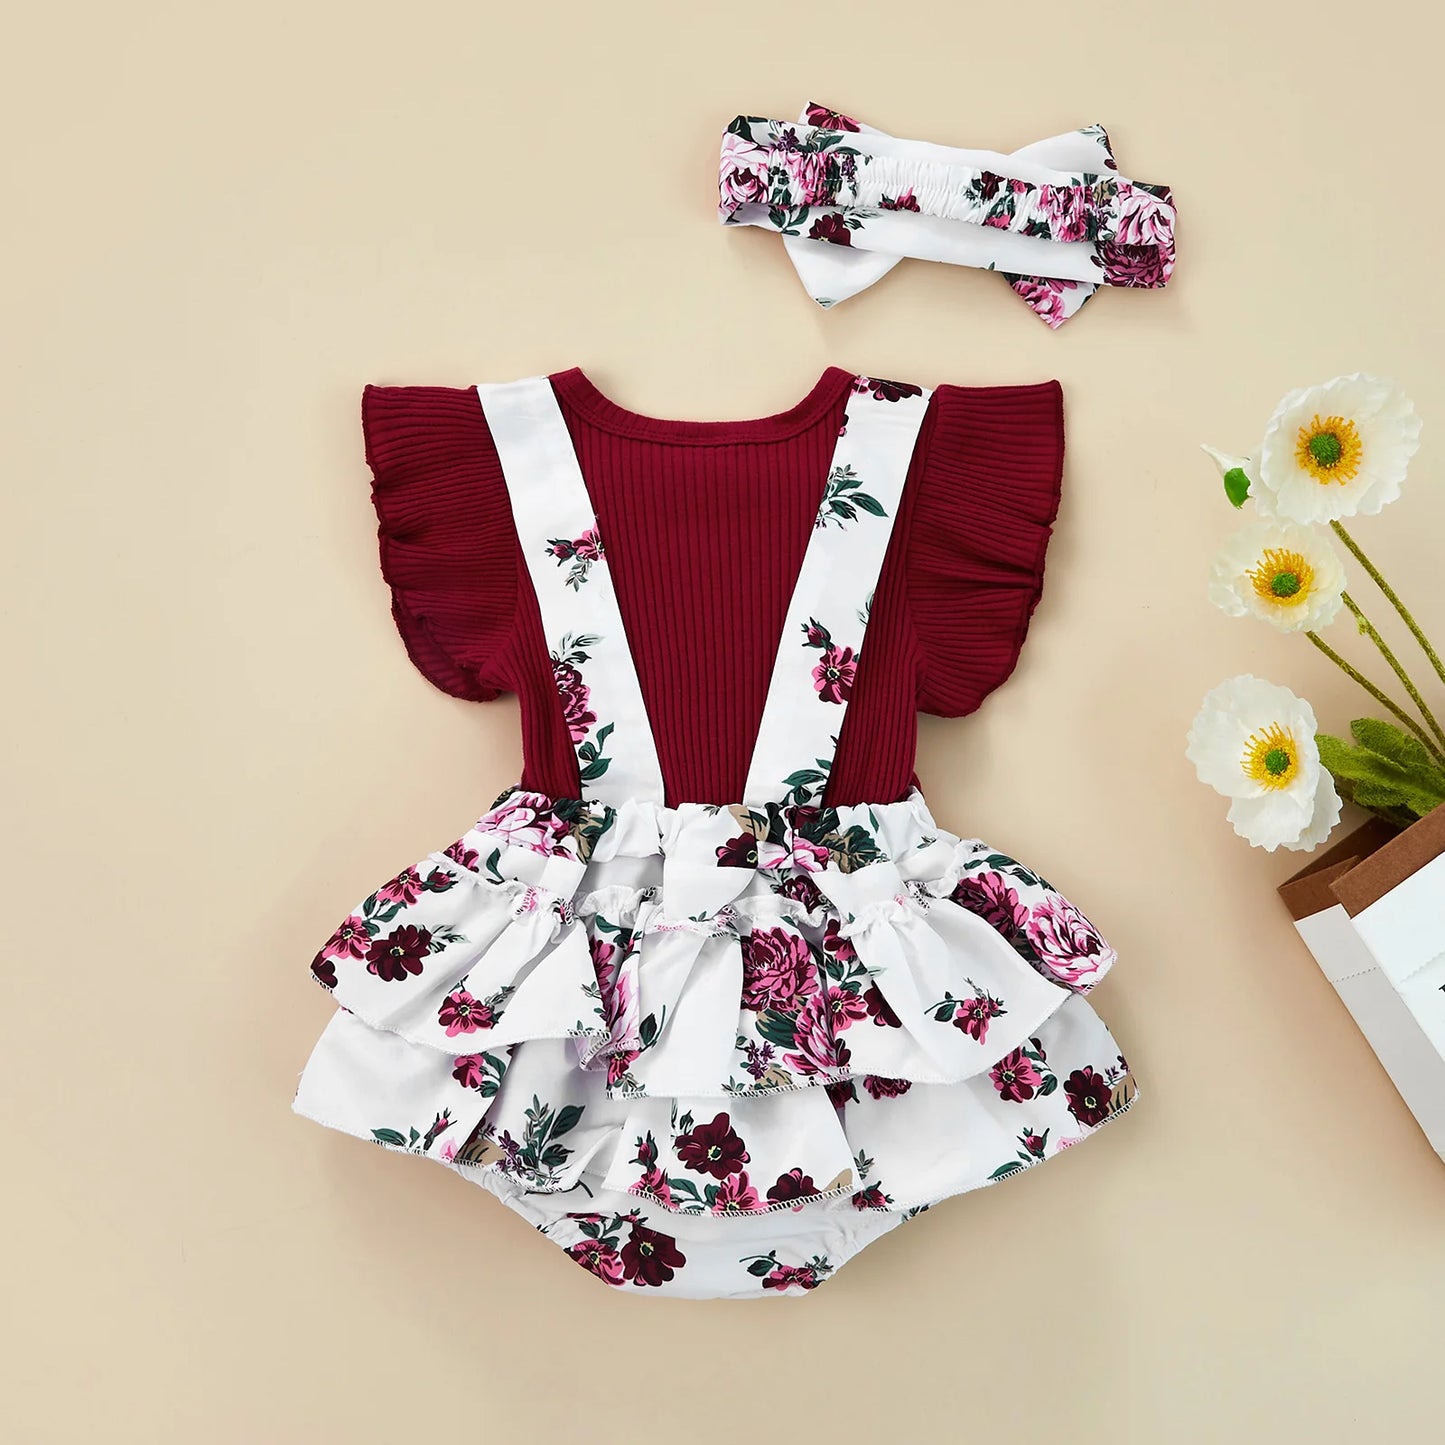 Infant Baby Girl Romper, Fly Sleeve Round Neck Ruffle Patchwork Toddler Summer Loose Jumpsuit+Head Band